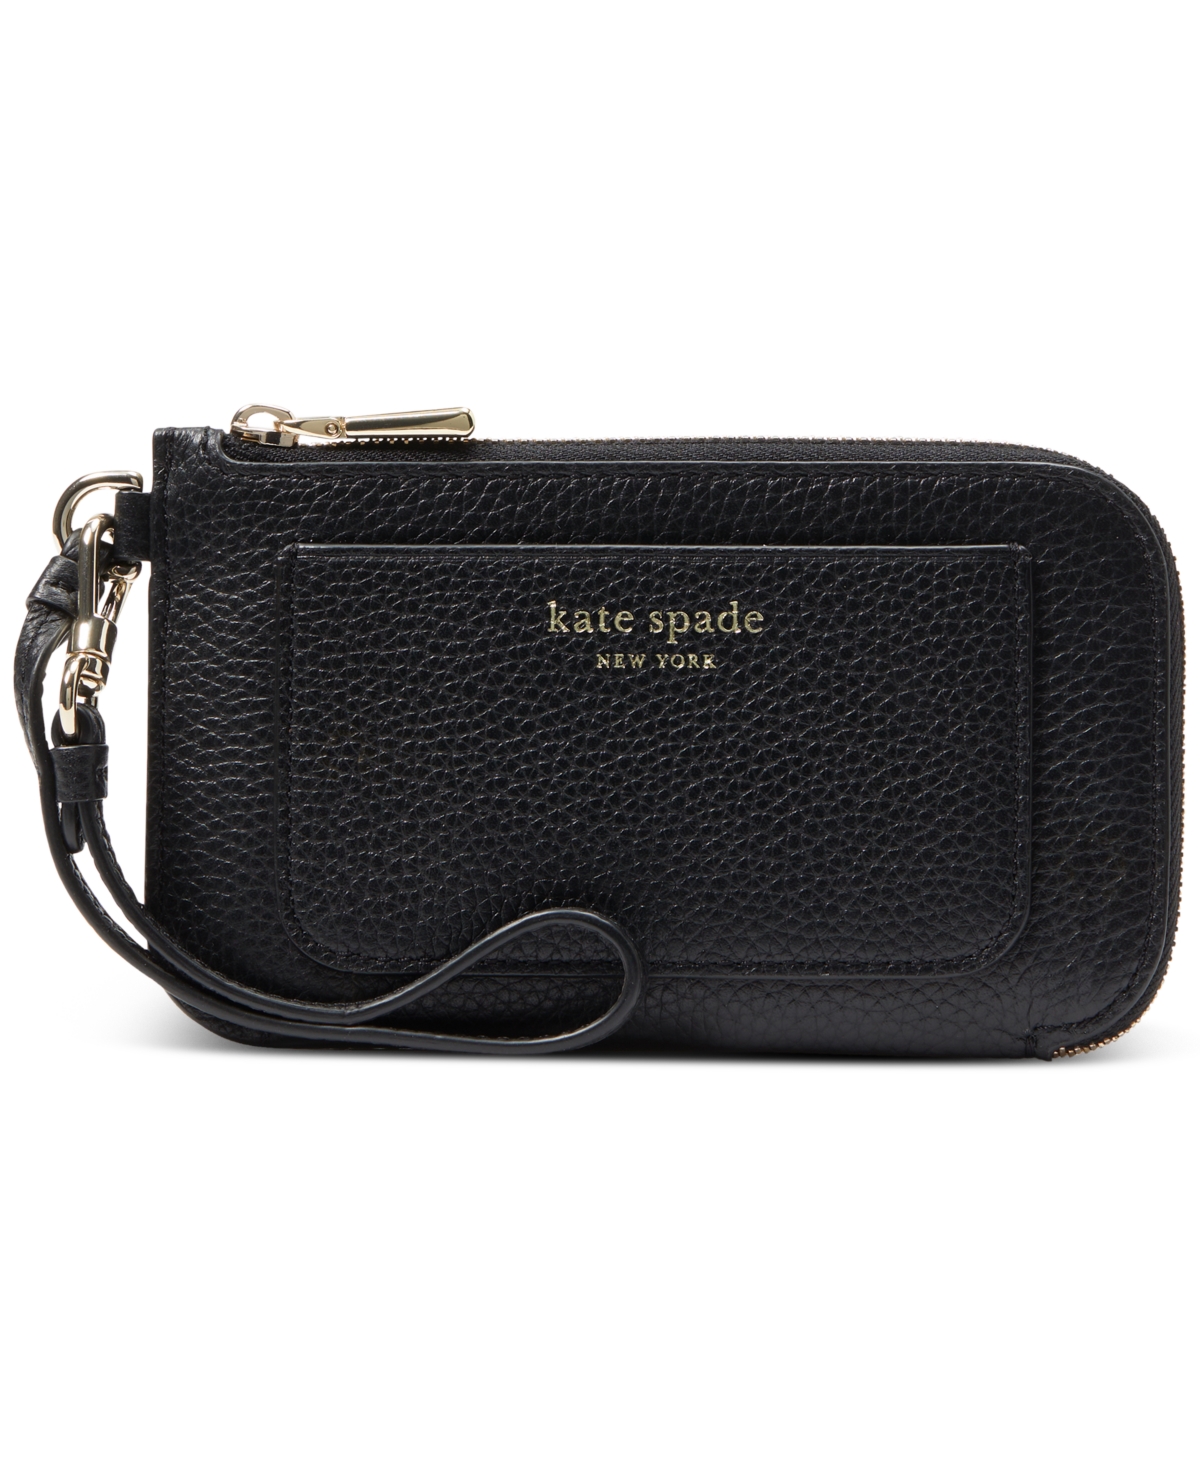 Ava Pebbled Leather Coin Card Case Wristlet - Black